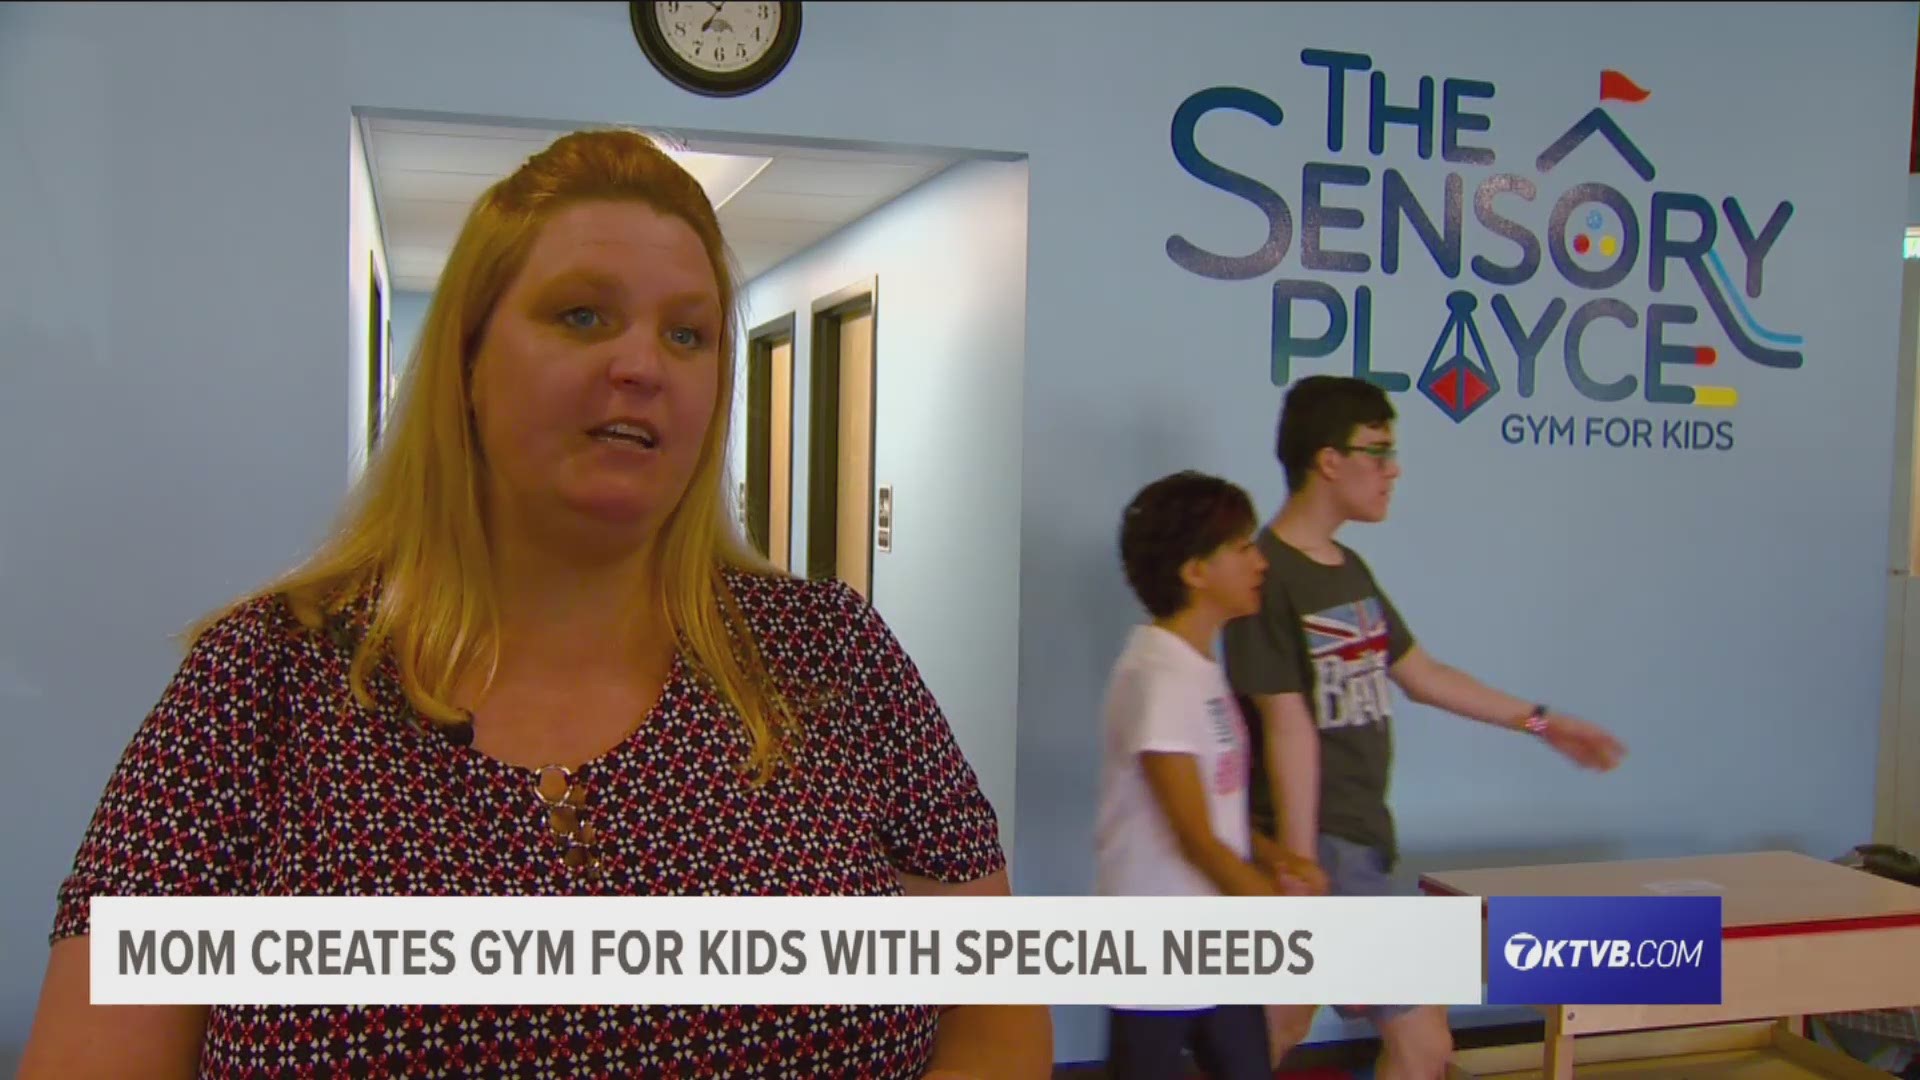 A Treasure Valley mom decided to start a gym for kids with special needs. The Sensory Playce has been open for close to a year in Boise, and families are truly enjoying what it has to offer. “The Sensory Playce is a gym specifically designed to meet the needs of special needs children,” Jen Johnson, founder of The Sensory Playce, said. “We welcome all children of all abilities.”